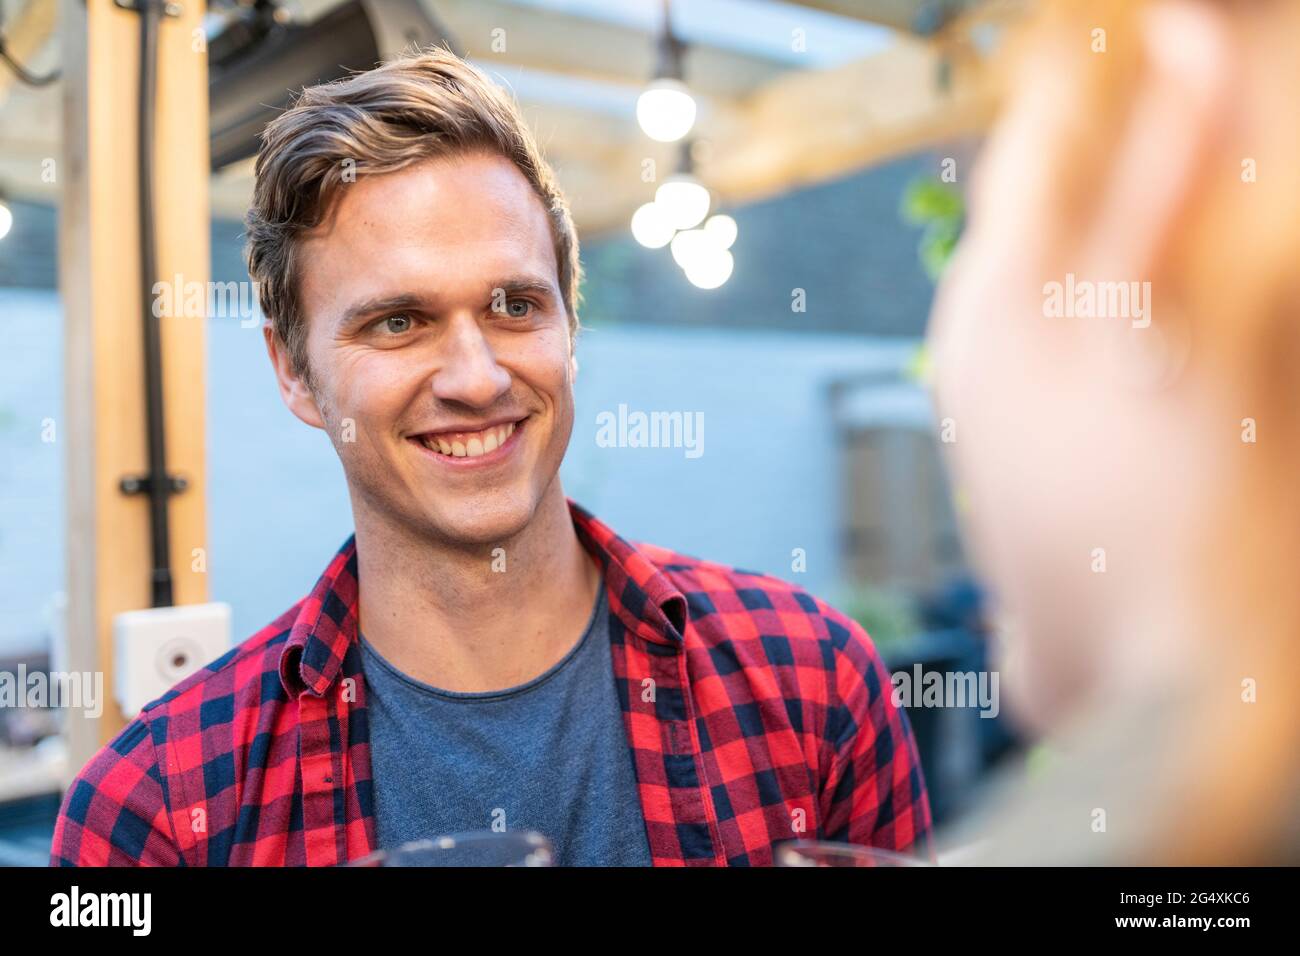 Smiling man in checked shirt at pub Stock Photo